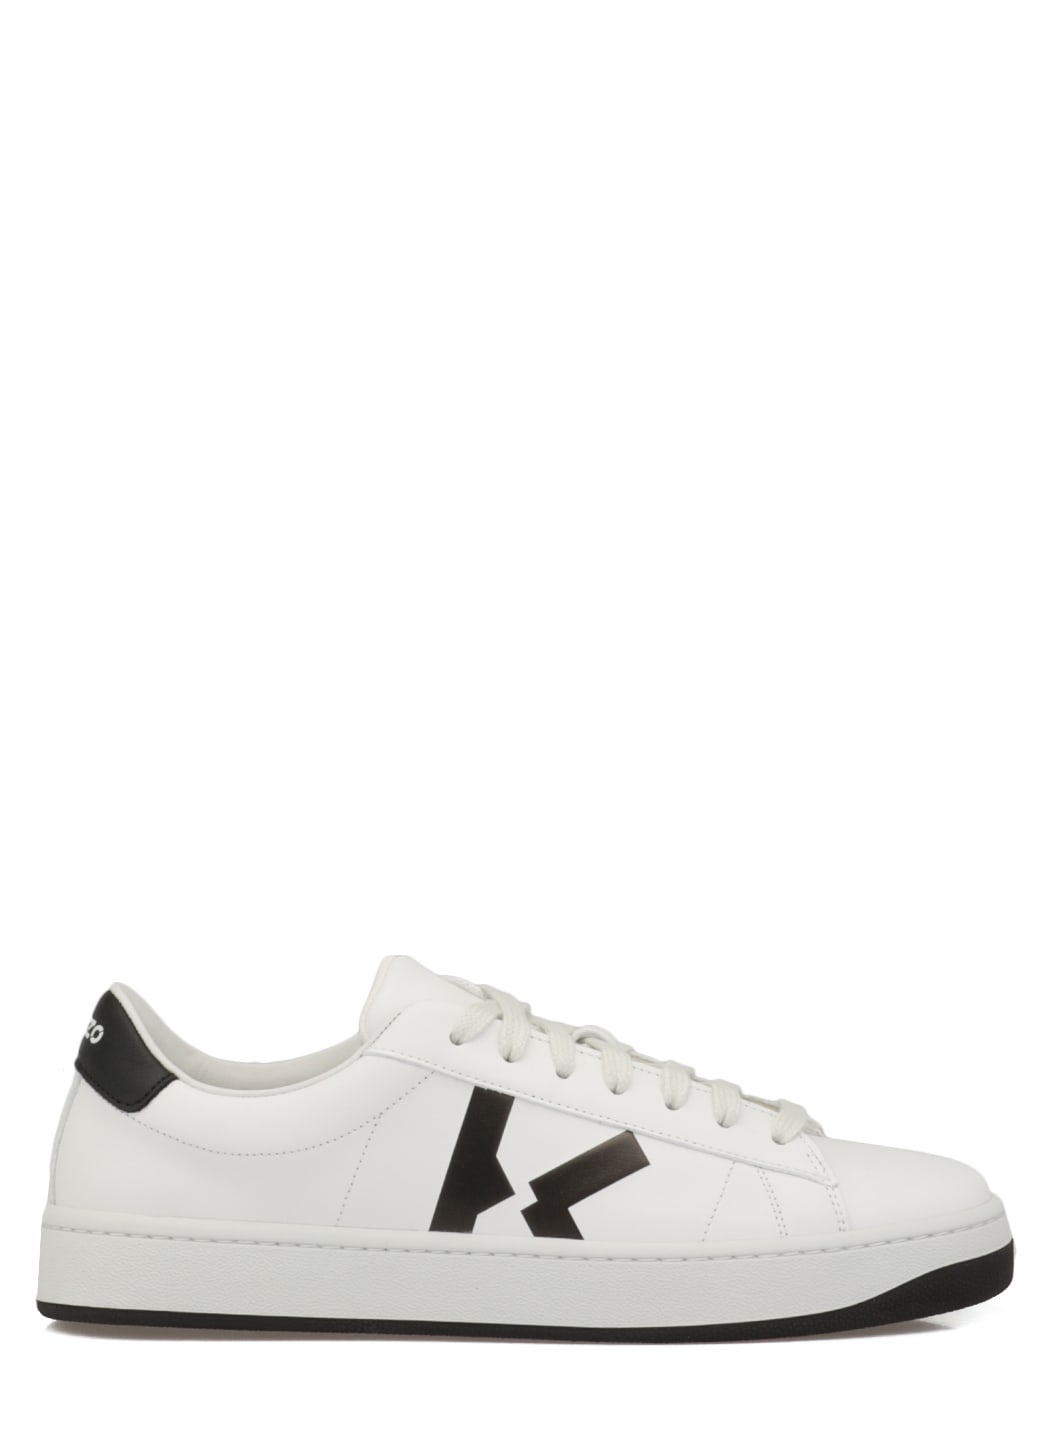 Buy Kenzo Kourt Leather Sneaker online, shop Kenzo shoes with free shipping